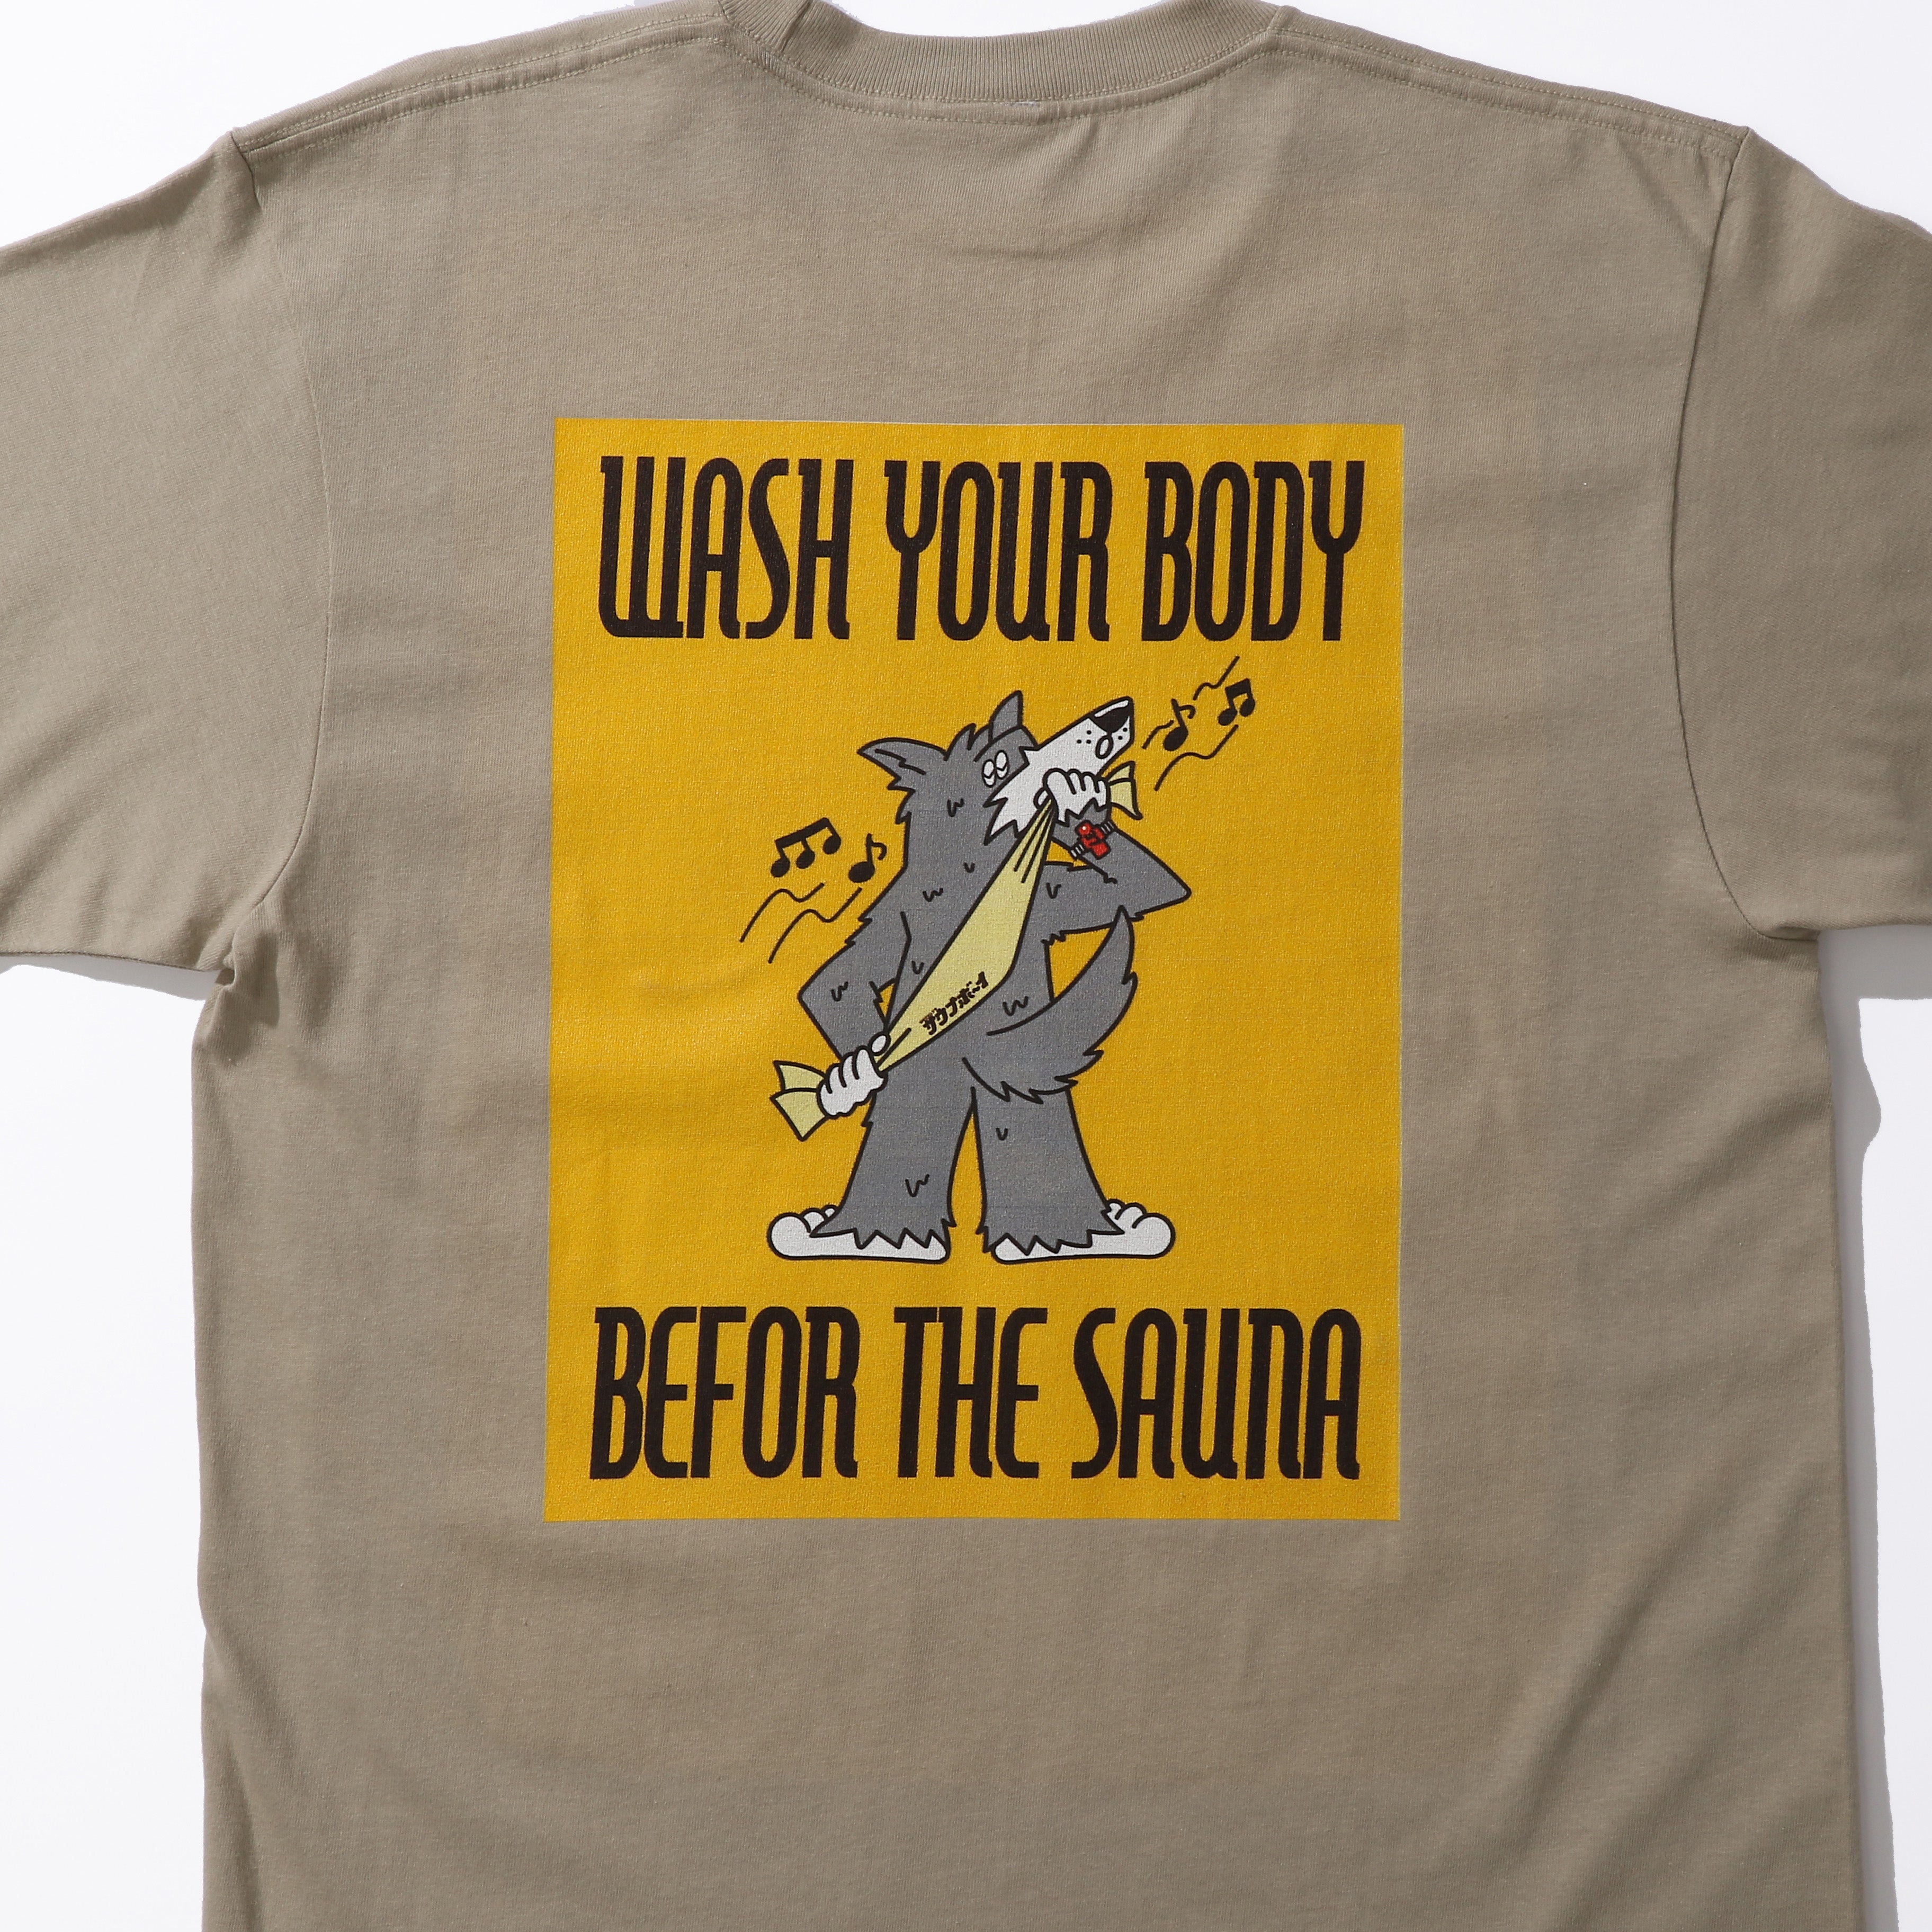 WASH YOUR BODY S/S Tee